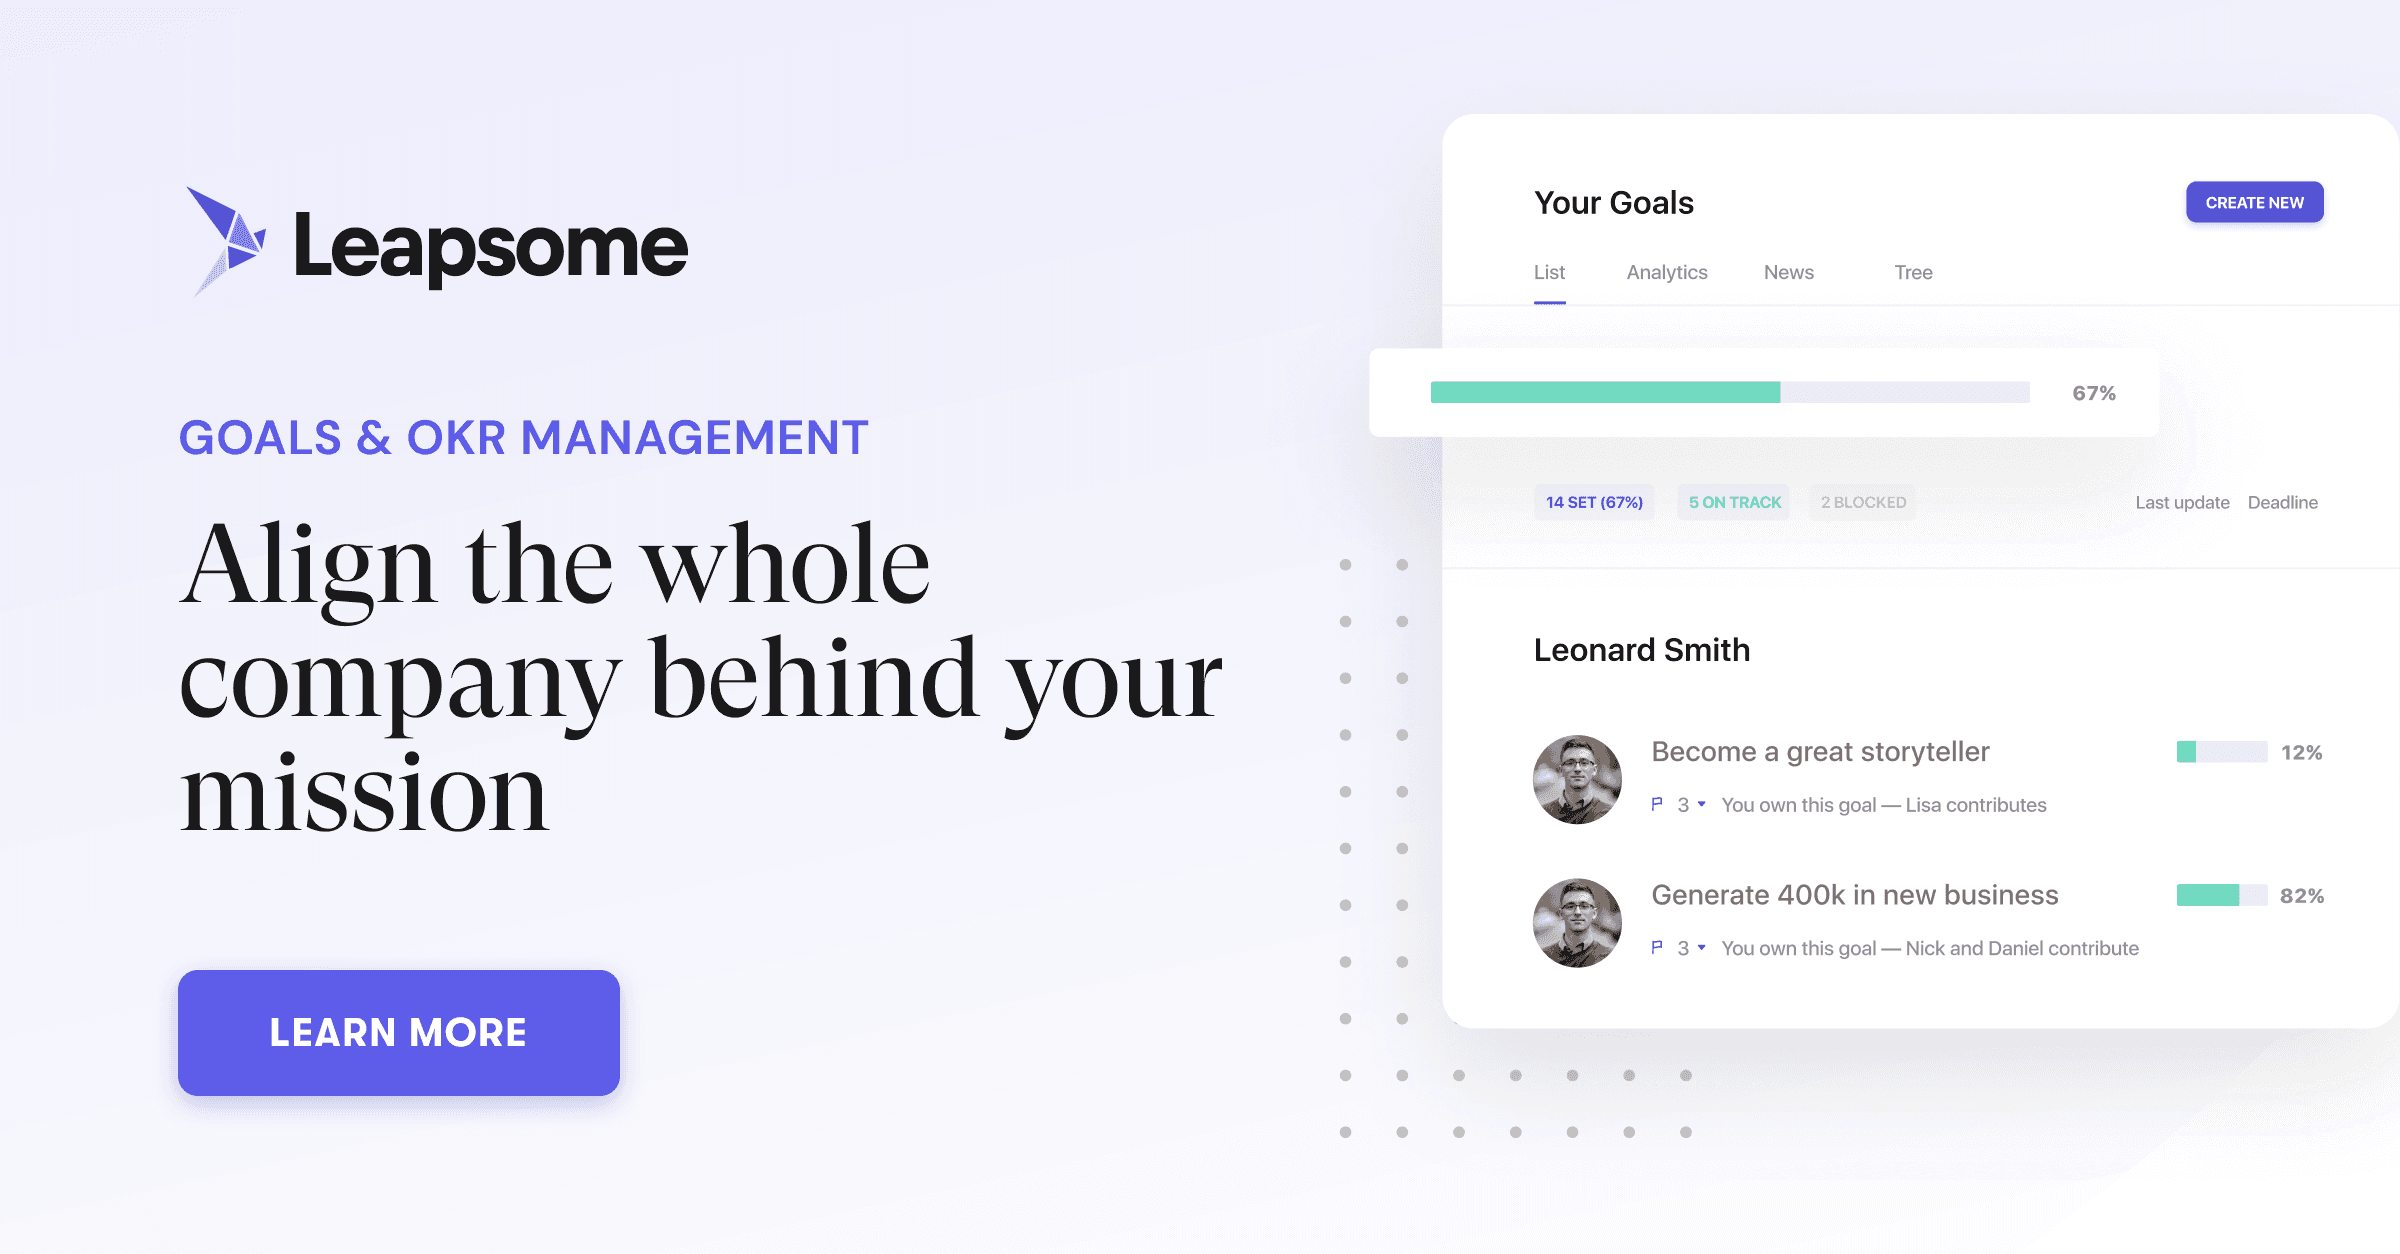 Product: Goals & OKR Management Software | Leapsome